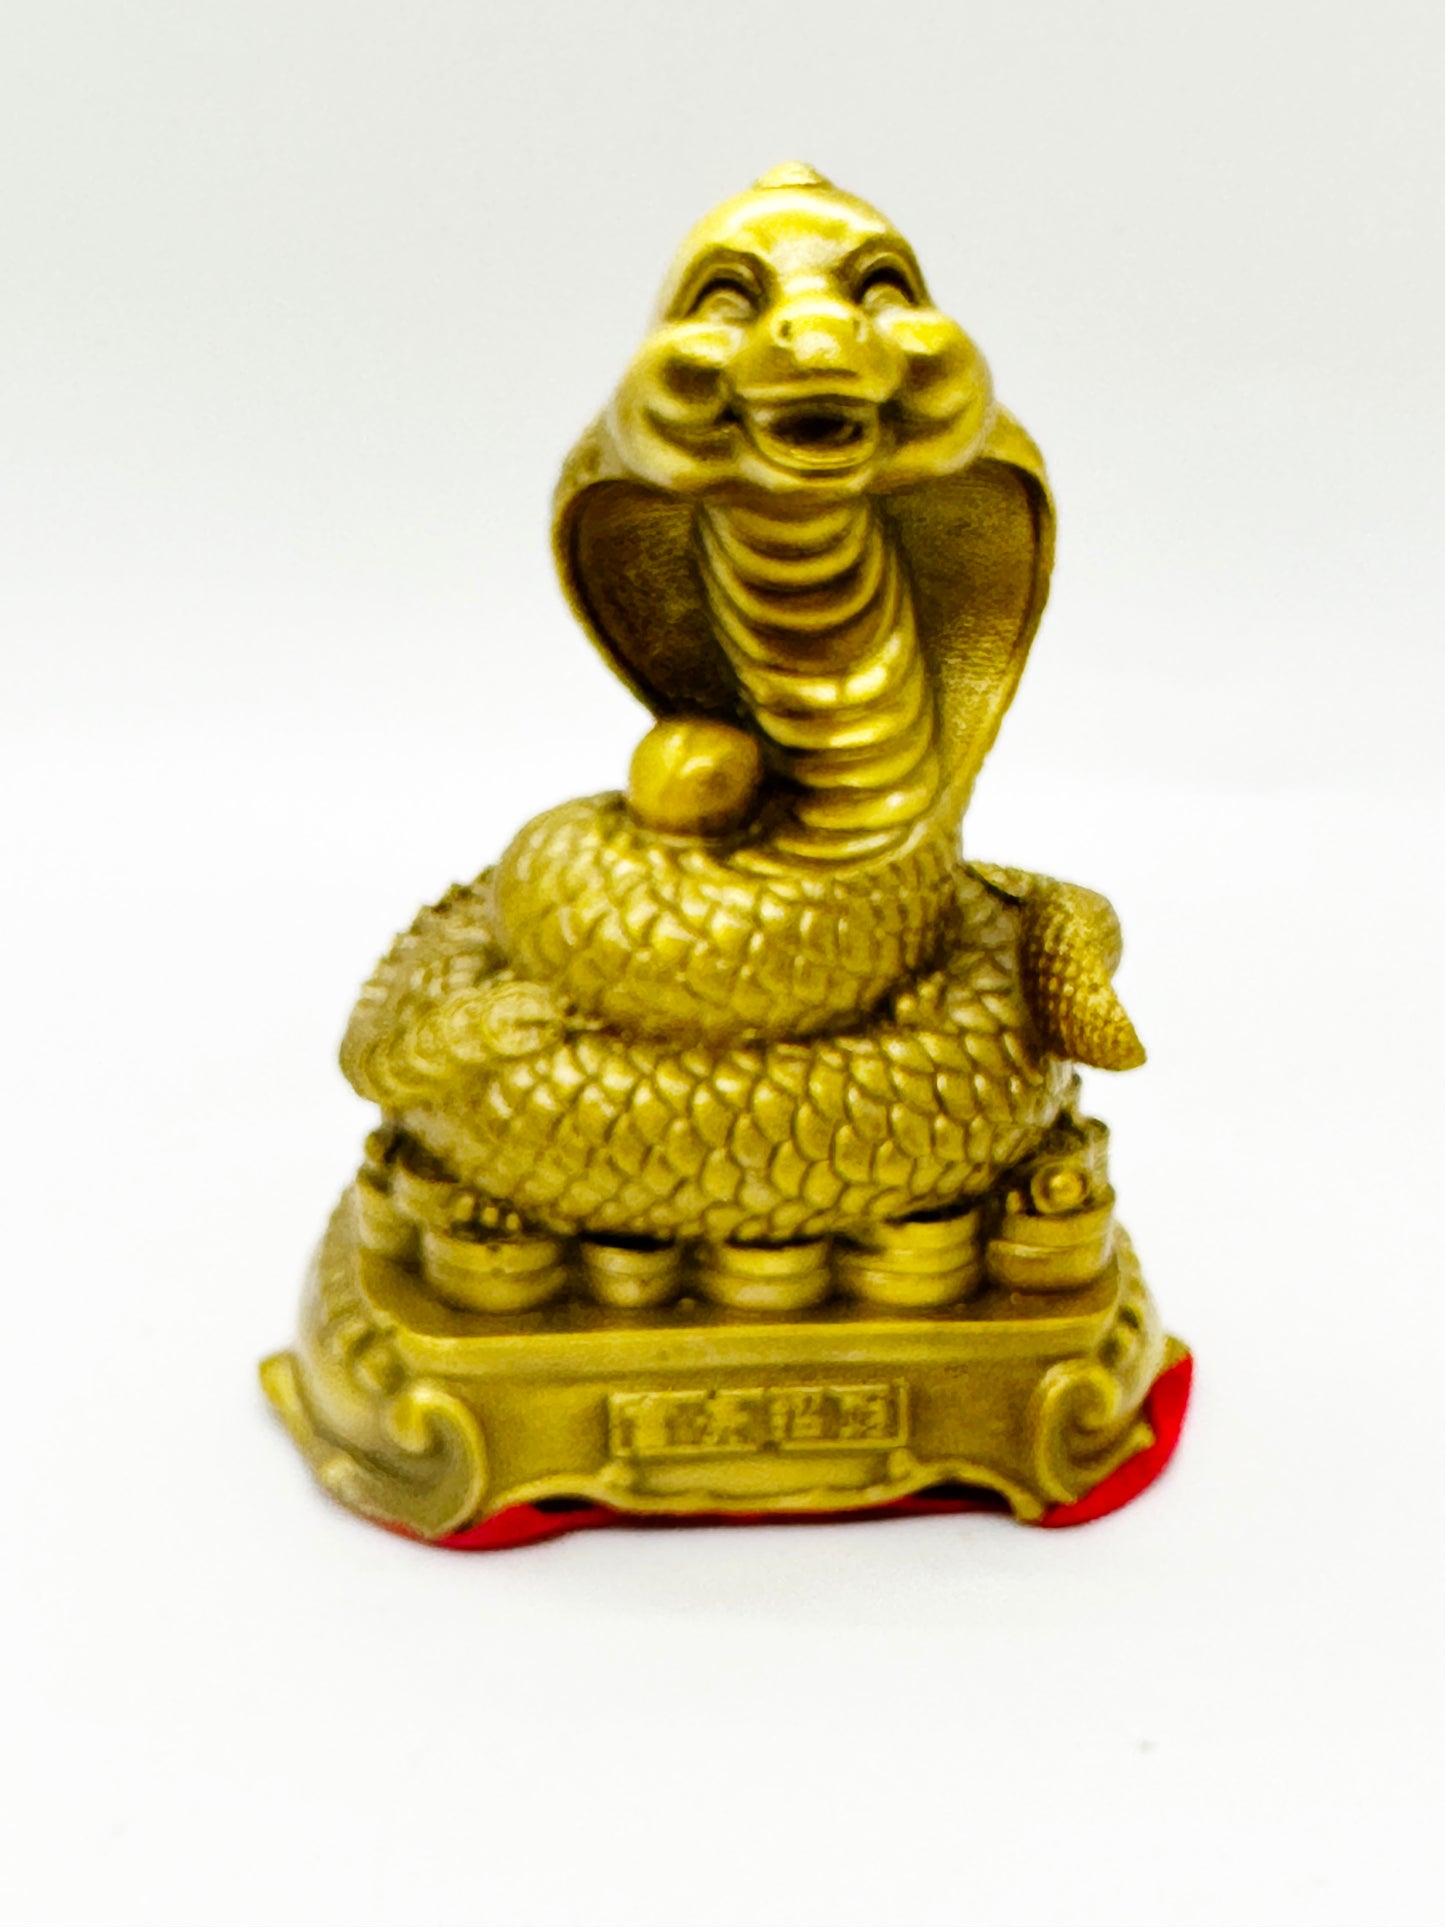 6651 -  Brass Snake Sitting On Coins - 4 3/4 Inches Height